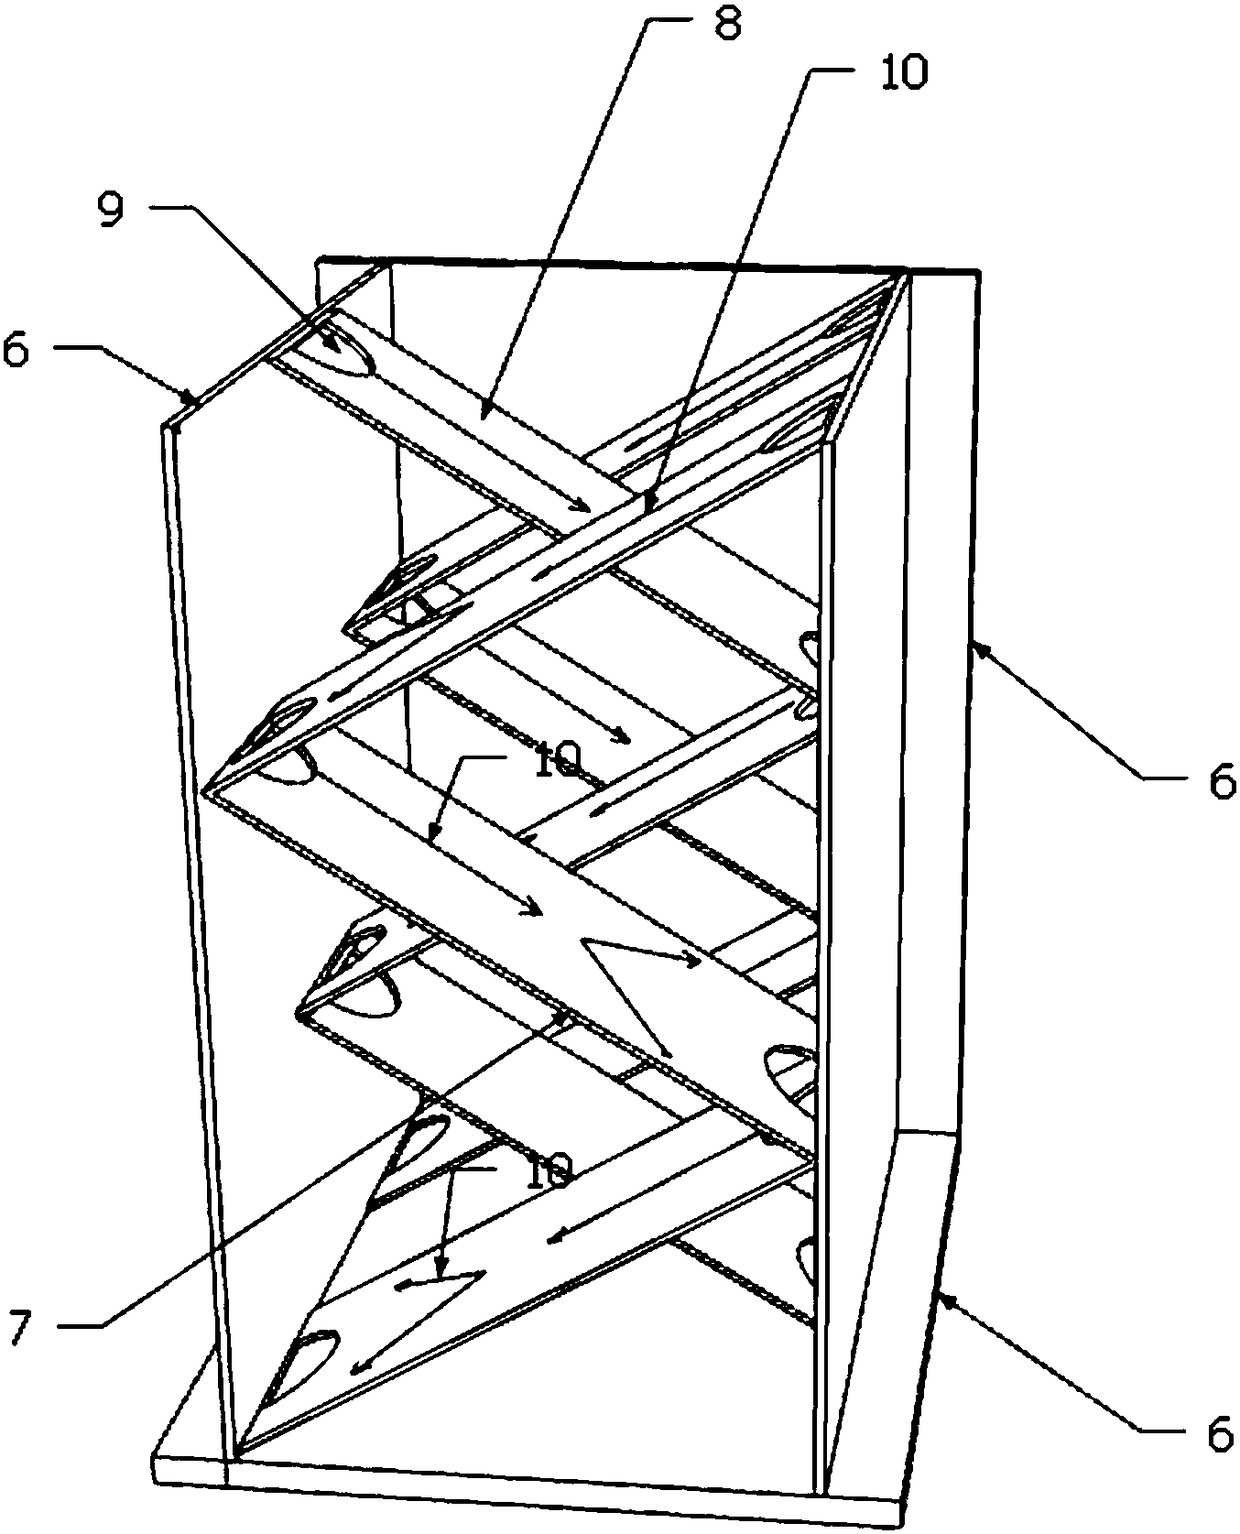 Steel-concrete composite beam structure applicable to self-compacting concrete pouring and design method